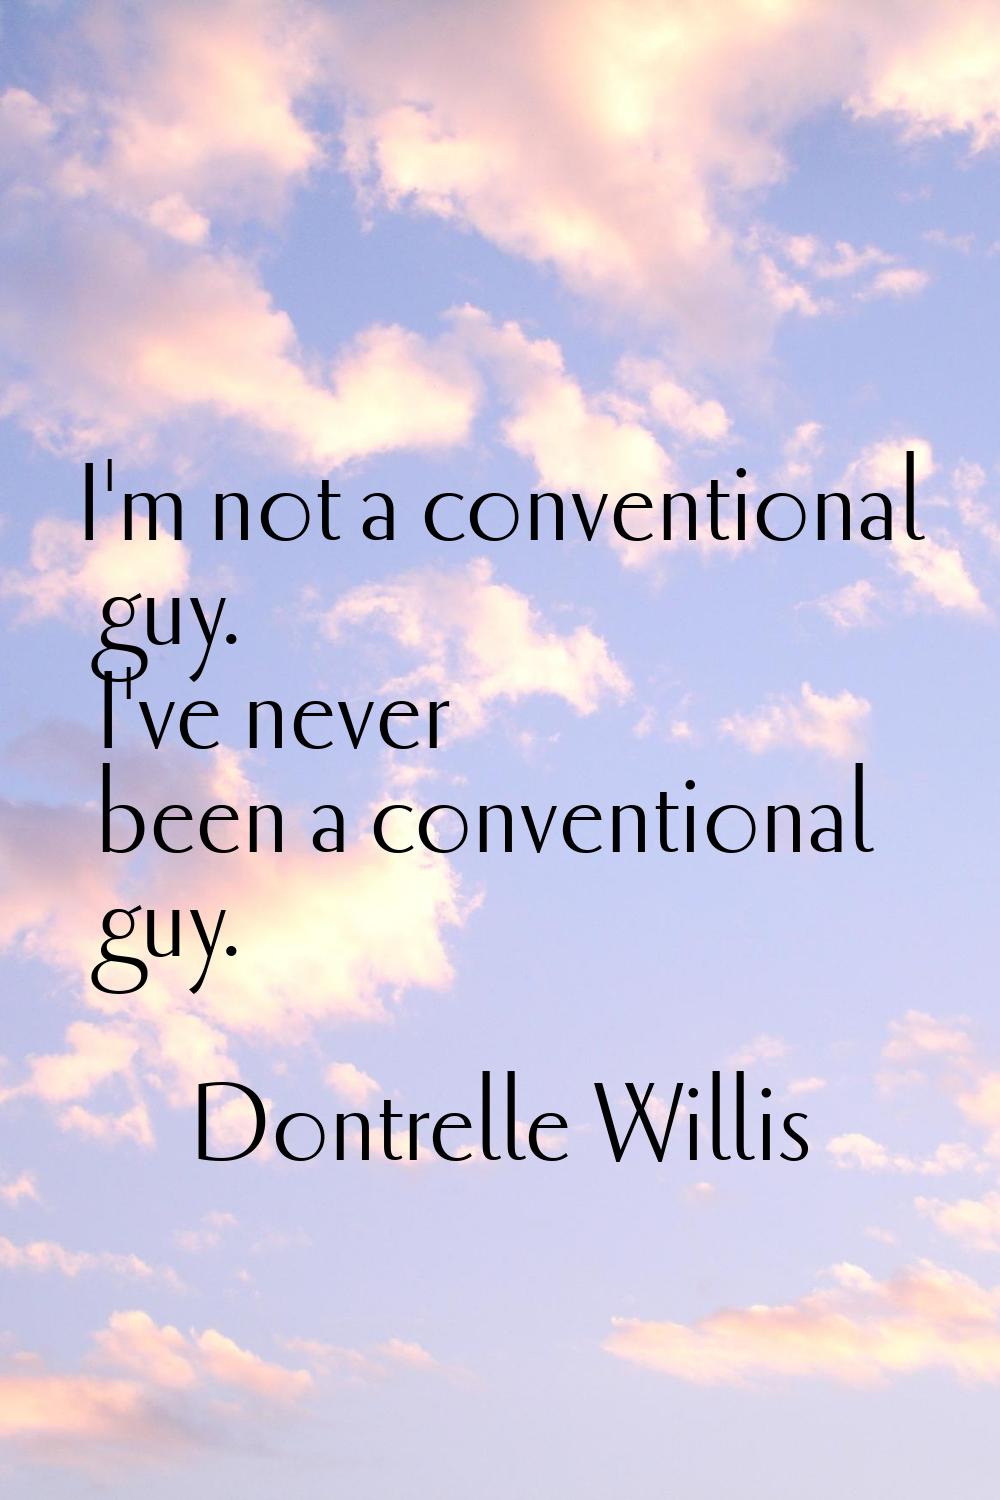 I'm not a conventional guy. I've never been a conventional guy.